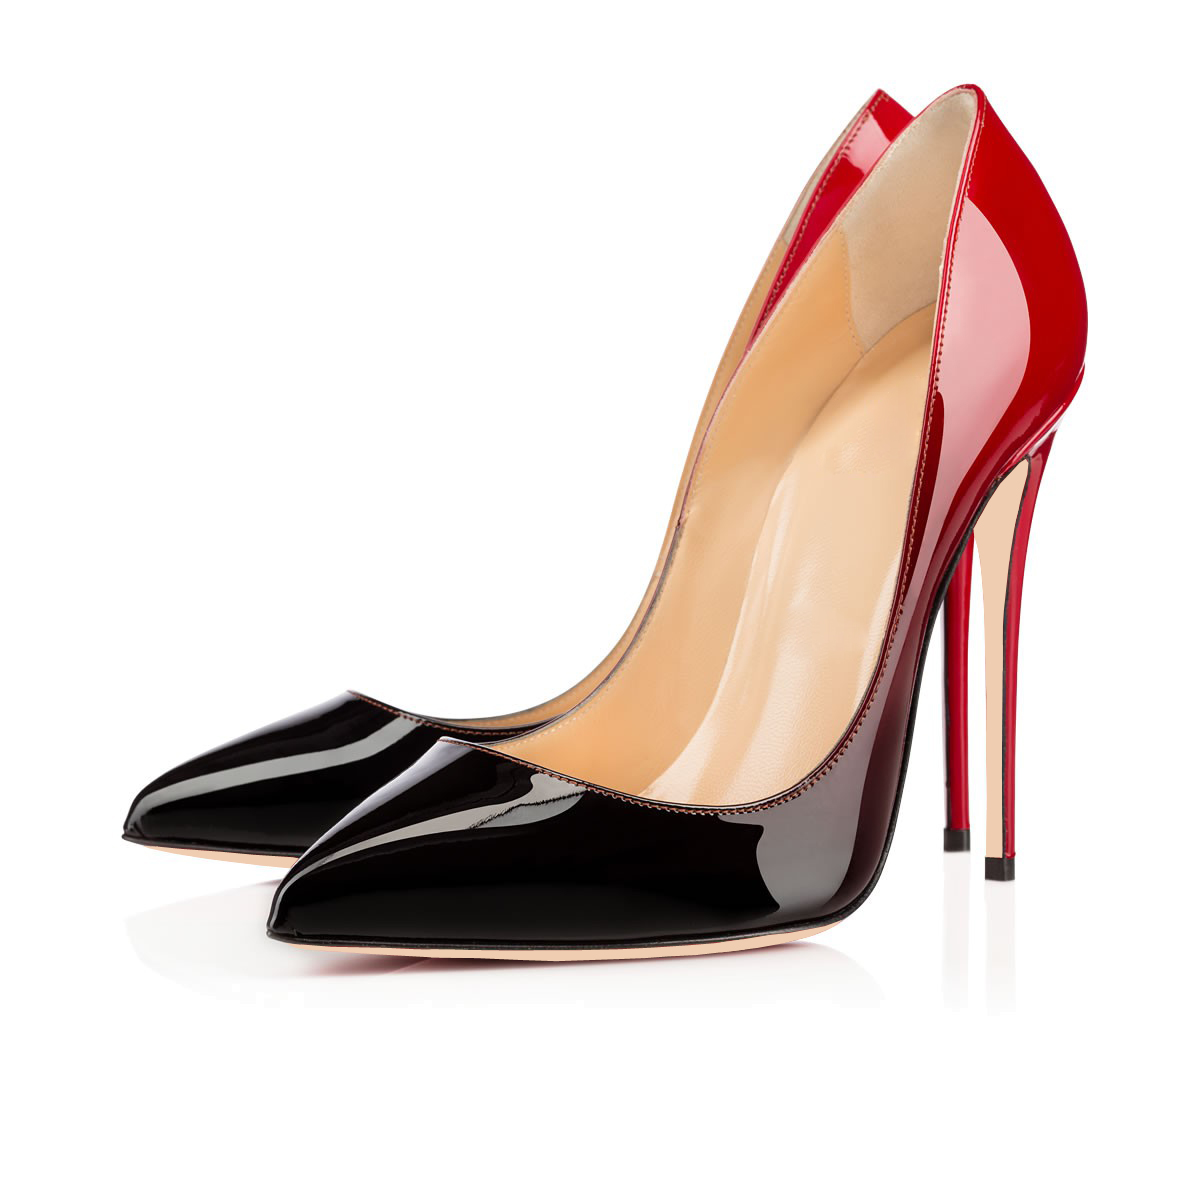 Pointed Toe Patent Leather Stiletto Pumps Featuring A Red Gradient Shade